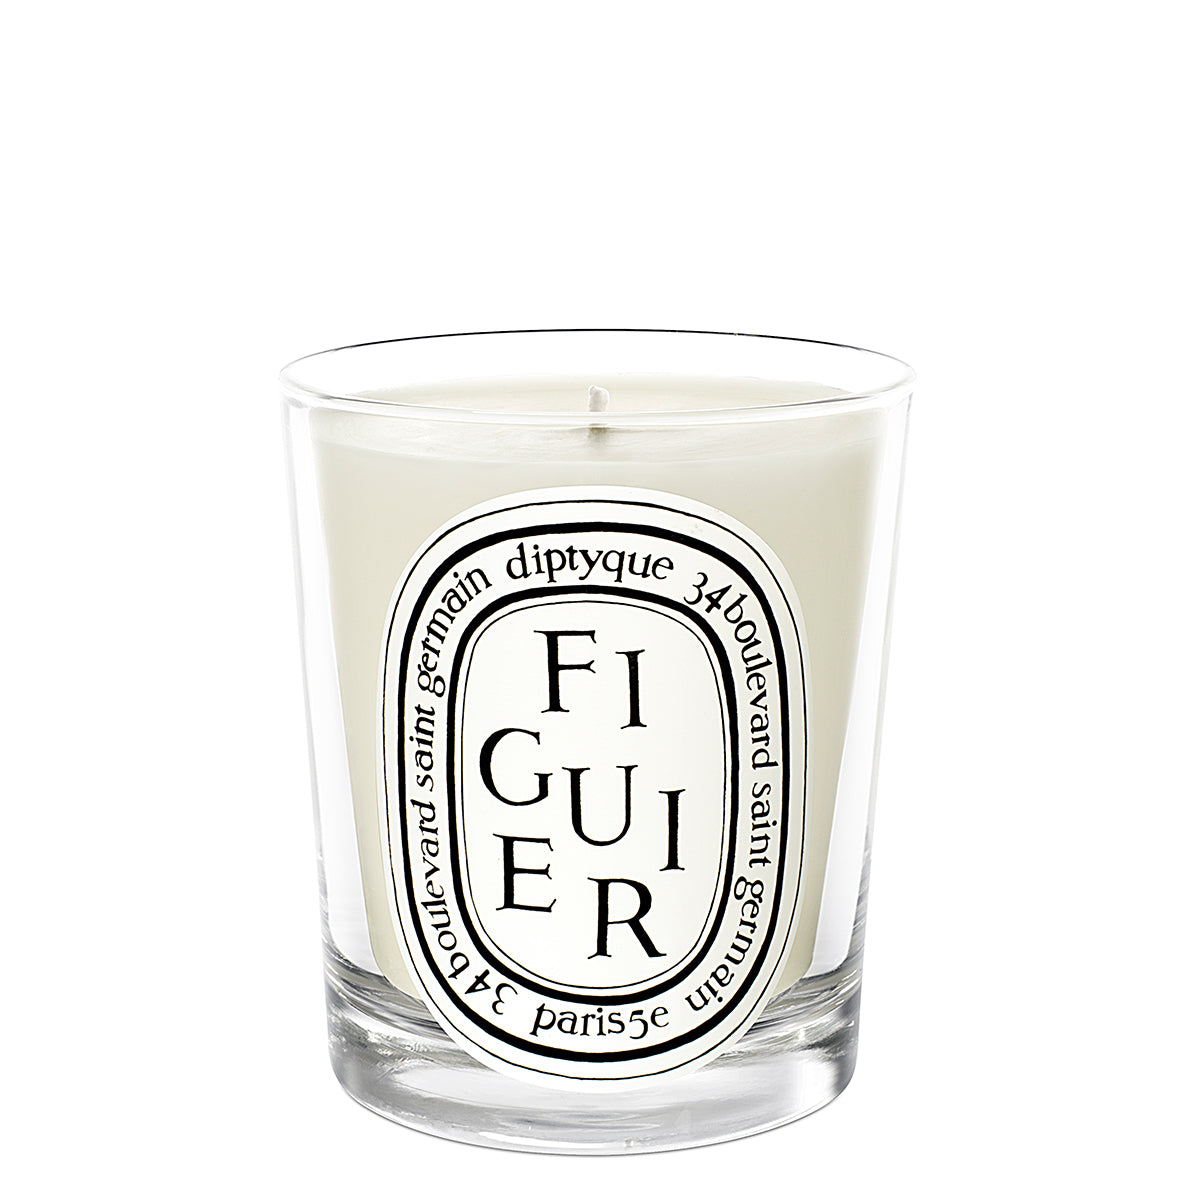 Primary image of Figuier (Fig Tree) Mini Candle